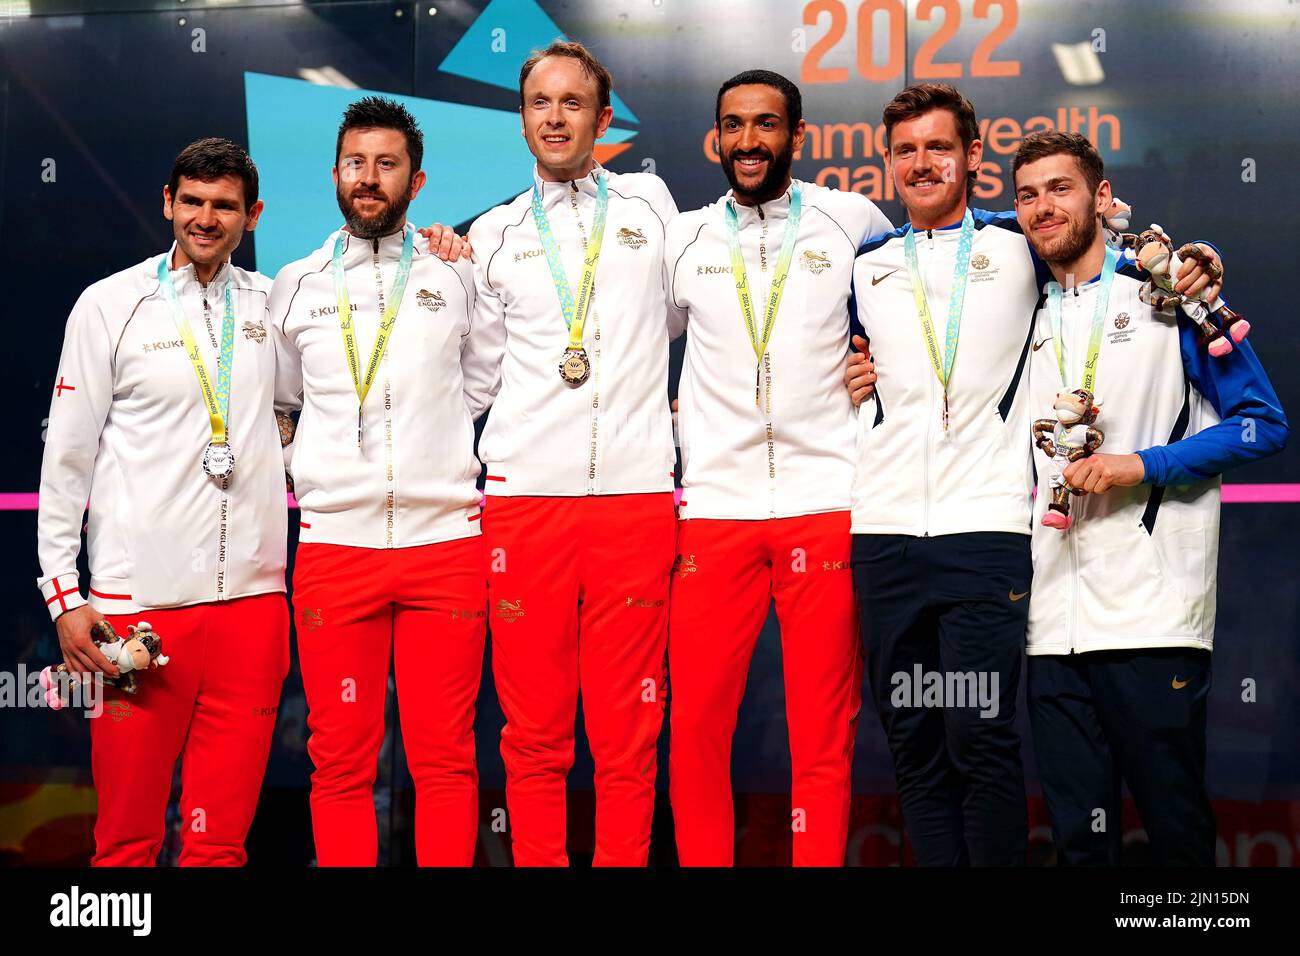 England's James Willstrop and Declan James (centre) with the gold medal, England's Adrian Waller and Daryl Selby (left) with the silver medal and Scotland's Greg Lobban and Rory Stewart with the bronze medals after the Men's Squash Doubles Medal match at the University of Birmingham Hockey and Squash Centre on day eleven of the 2022 Commonwealth Games in Birmingham. Picture date: Monday August 8, 2022. Stock Photo